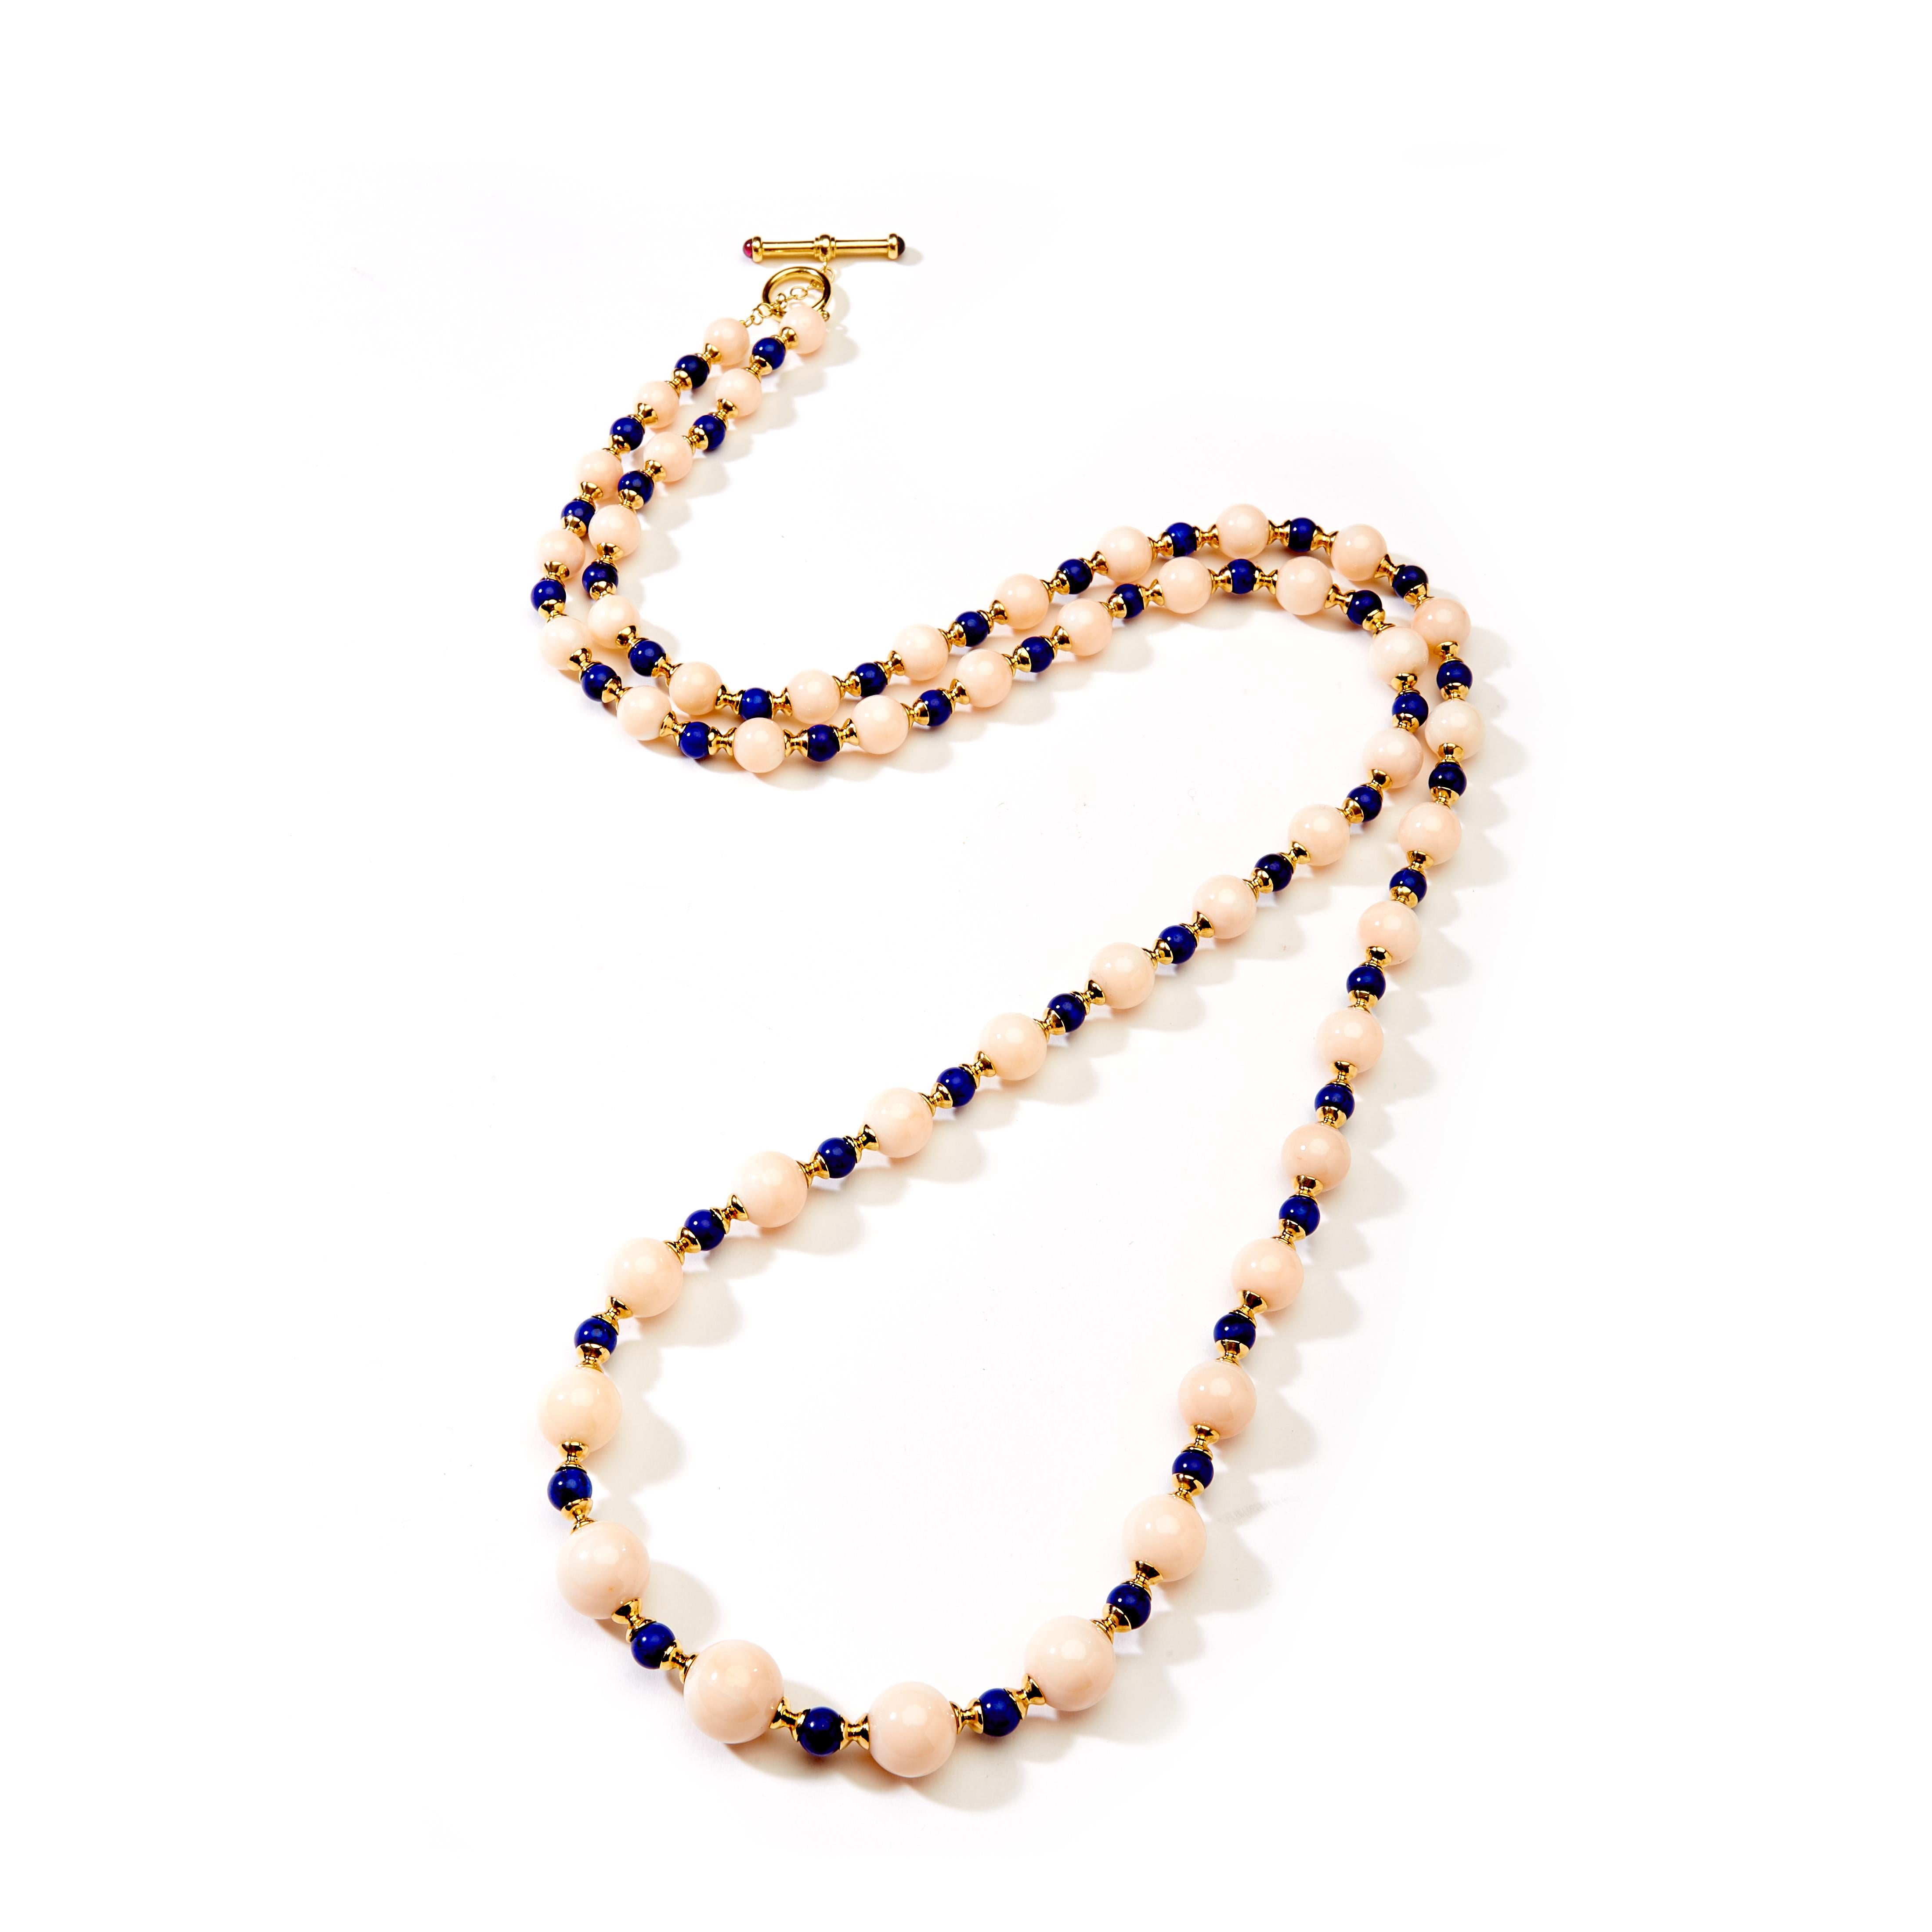 Created in 18 karat yellow gold
Angel Skin Coral gemstone beads 210 carats approx.
Lapis Lazuli gemstone beads 47 carats approx.
25 inches long, strung on silk
18 karat yellow gold hourglass roundels
18 karat large toggle clasp with rubellite
One of